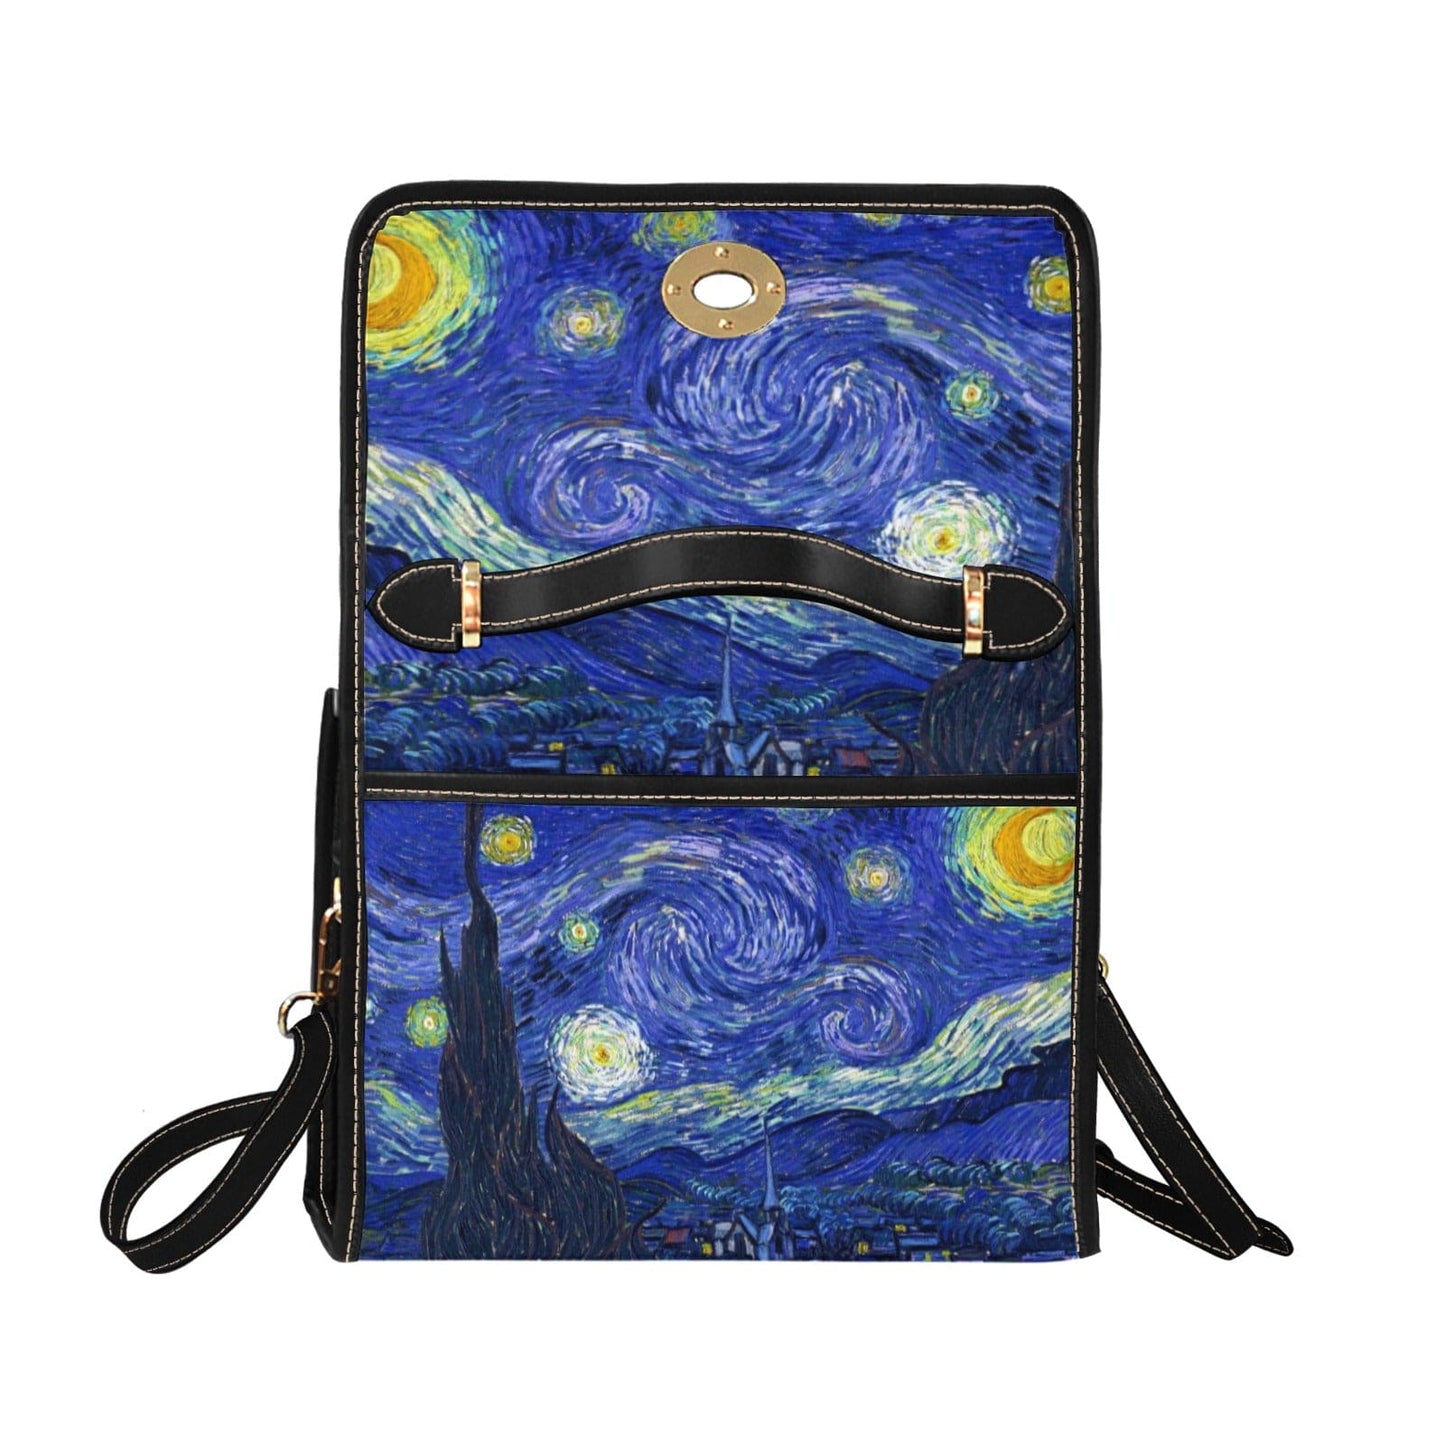 back view of the side view of the famous Van Gogh Starry Night printed on a high quality boxy satchel at Gallery Serpentine